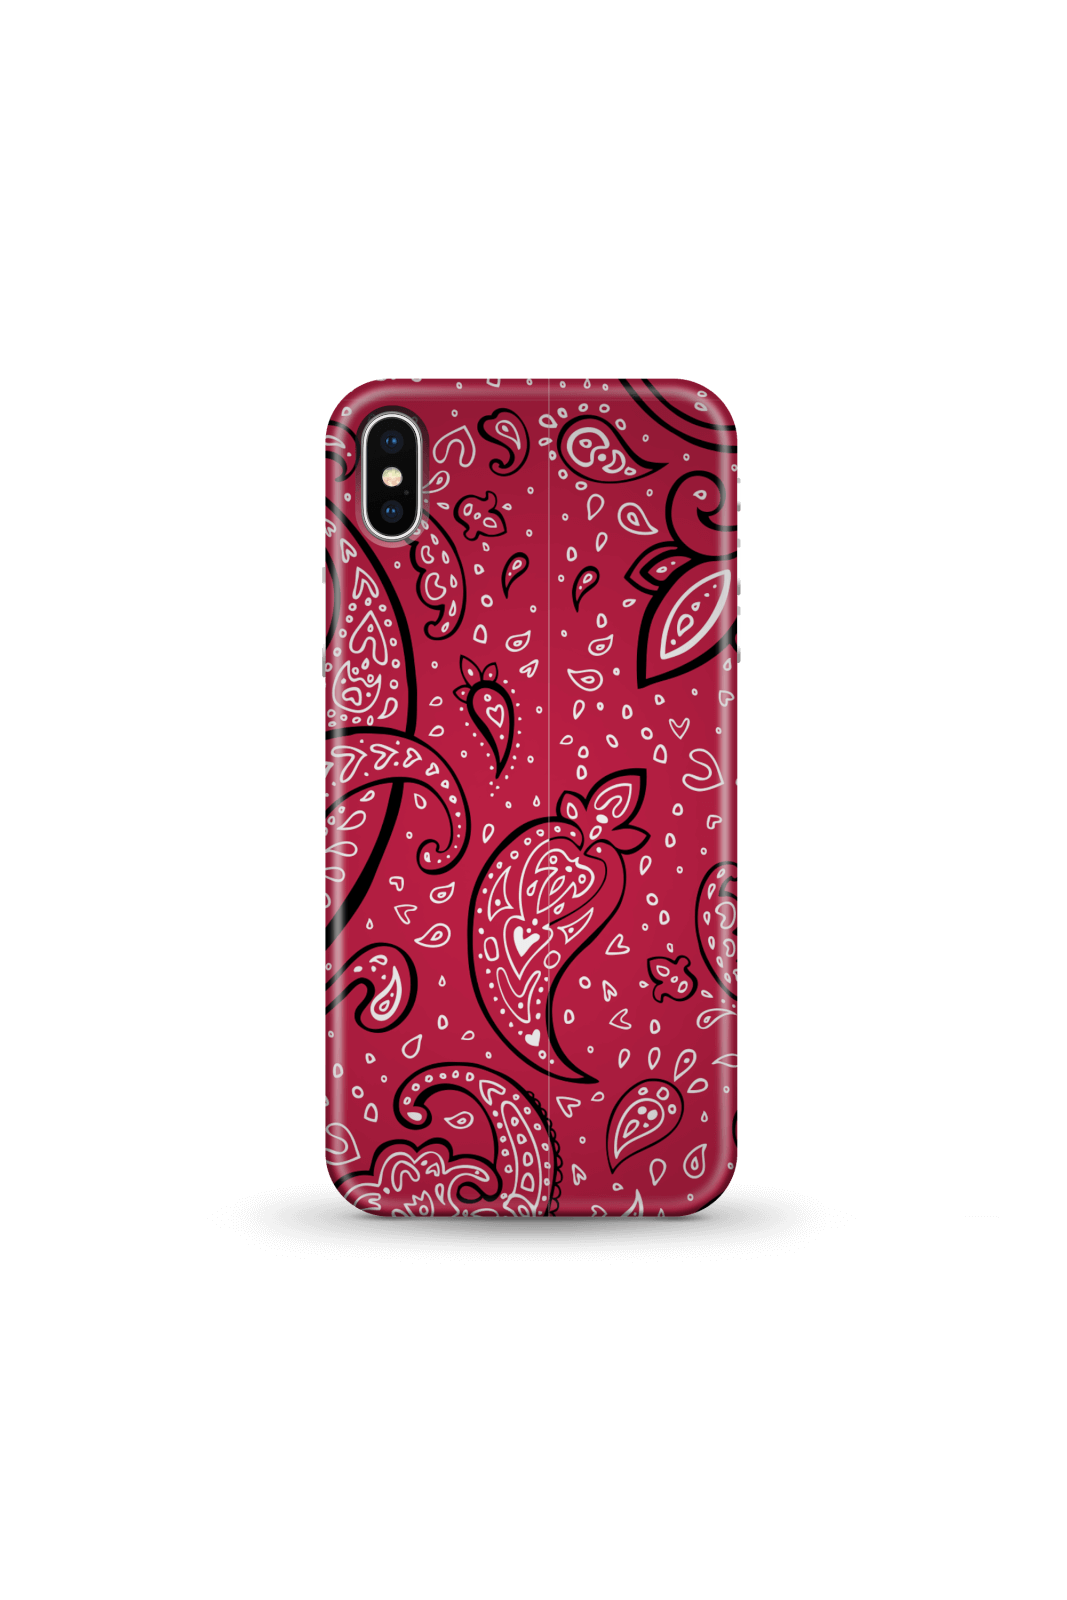 Red Paisley Phone Case for iPhone and Android - iPhone 5/5s - Snap Case - Matte